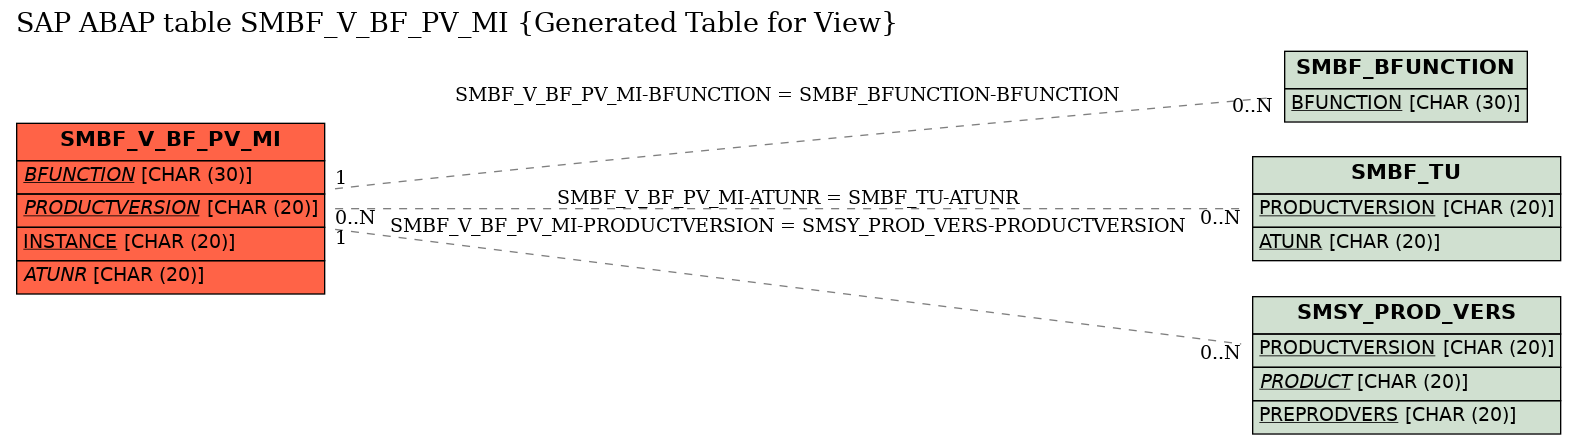 E-R Diagram for table SMBF_V_BF_PV_MI (Generated Table for View)